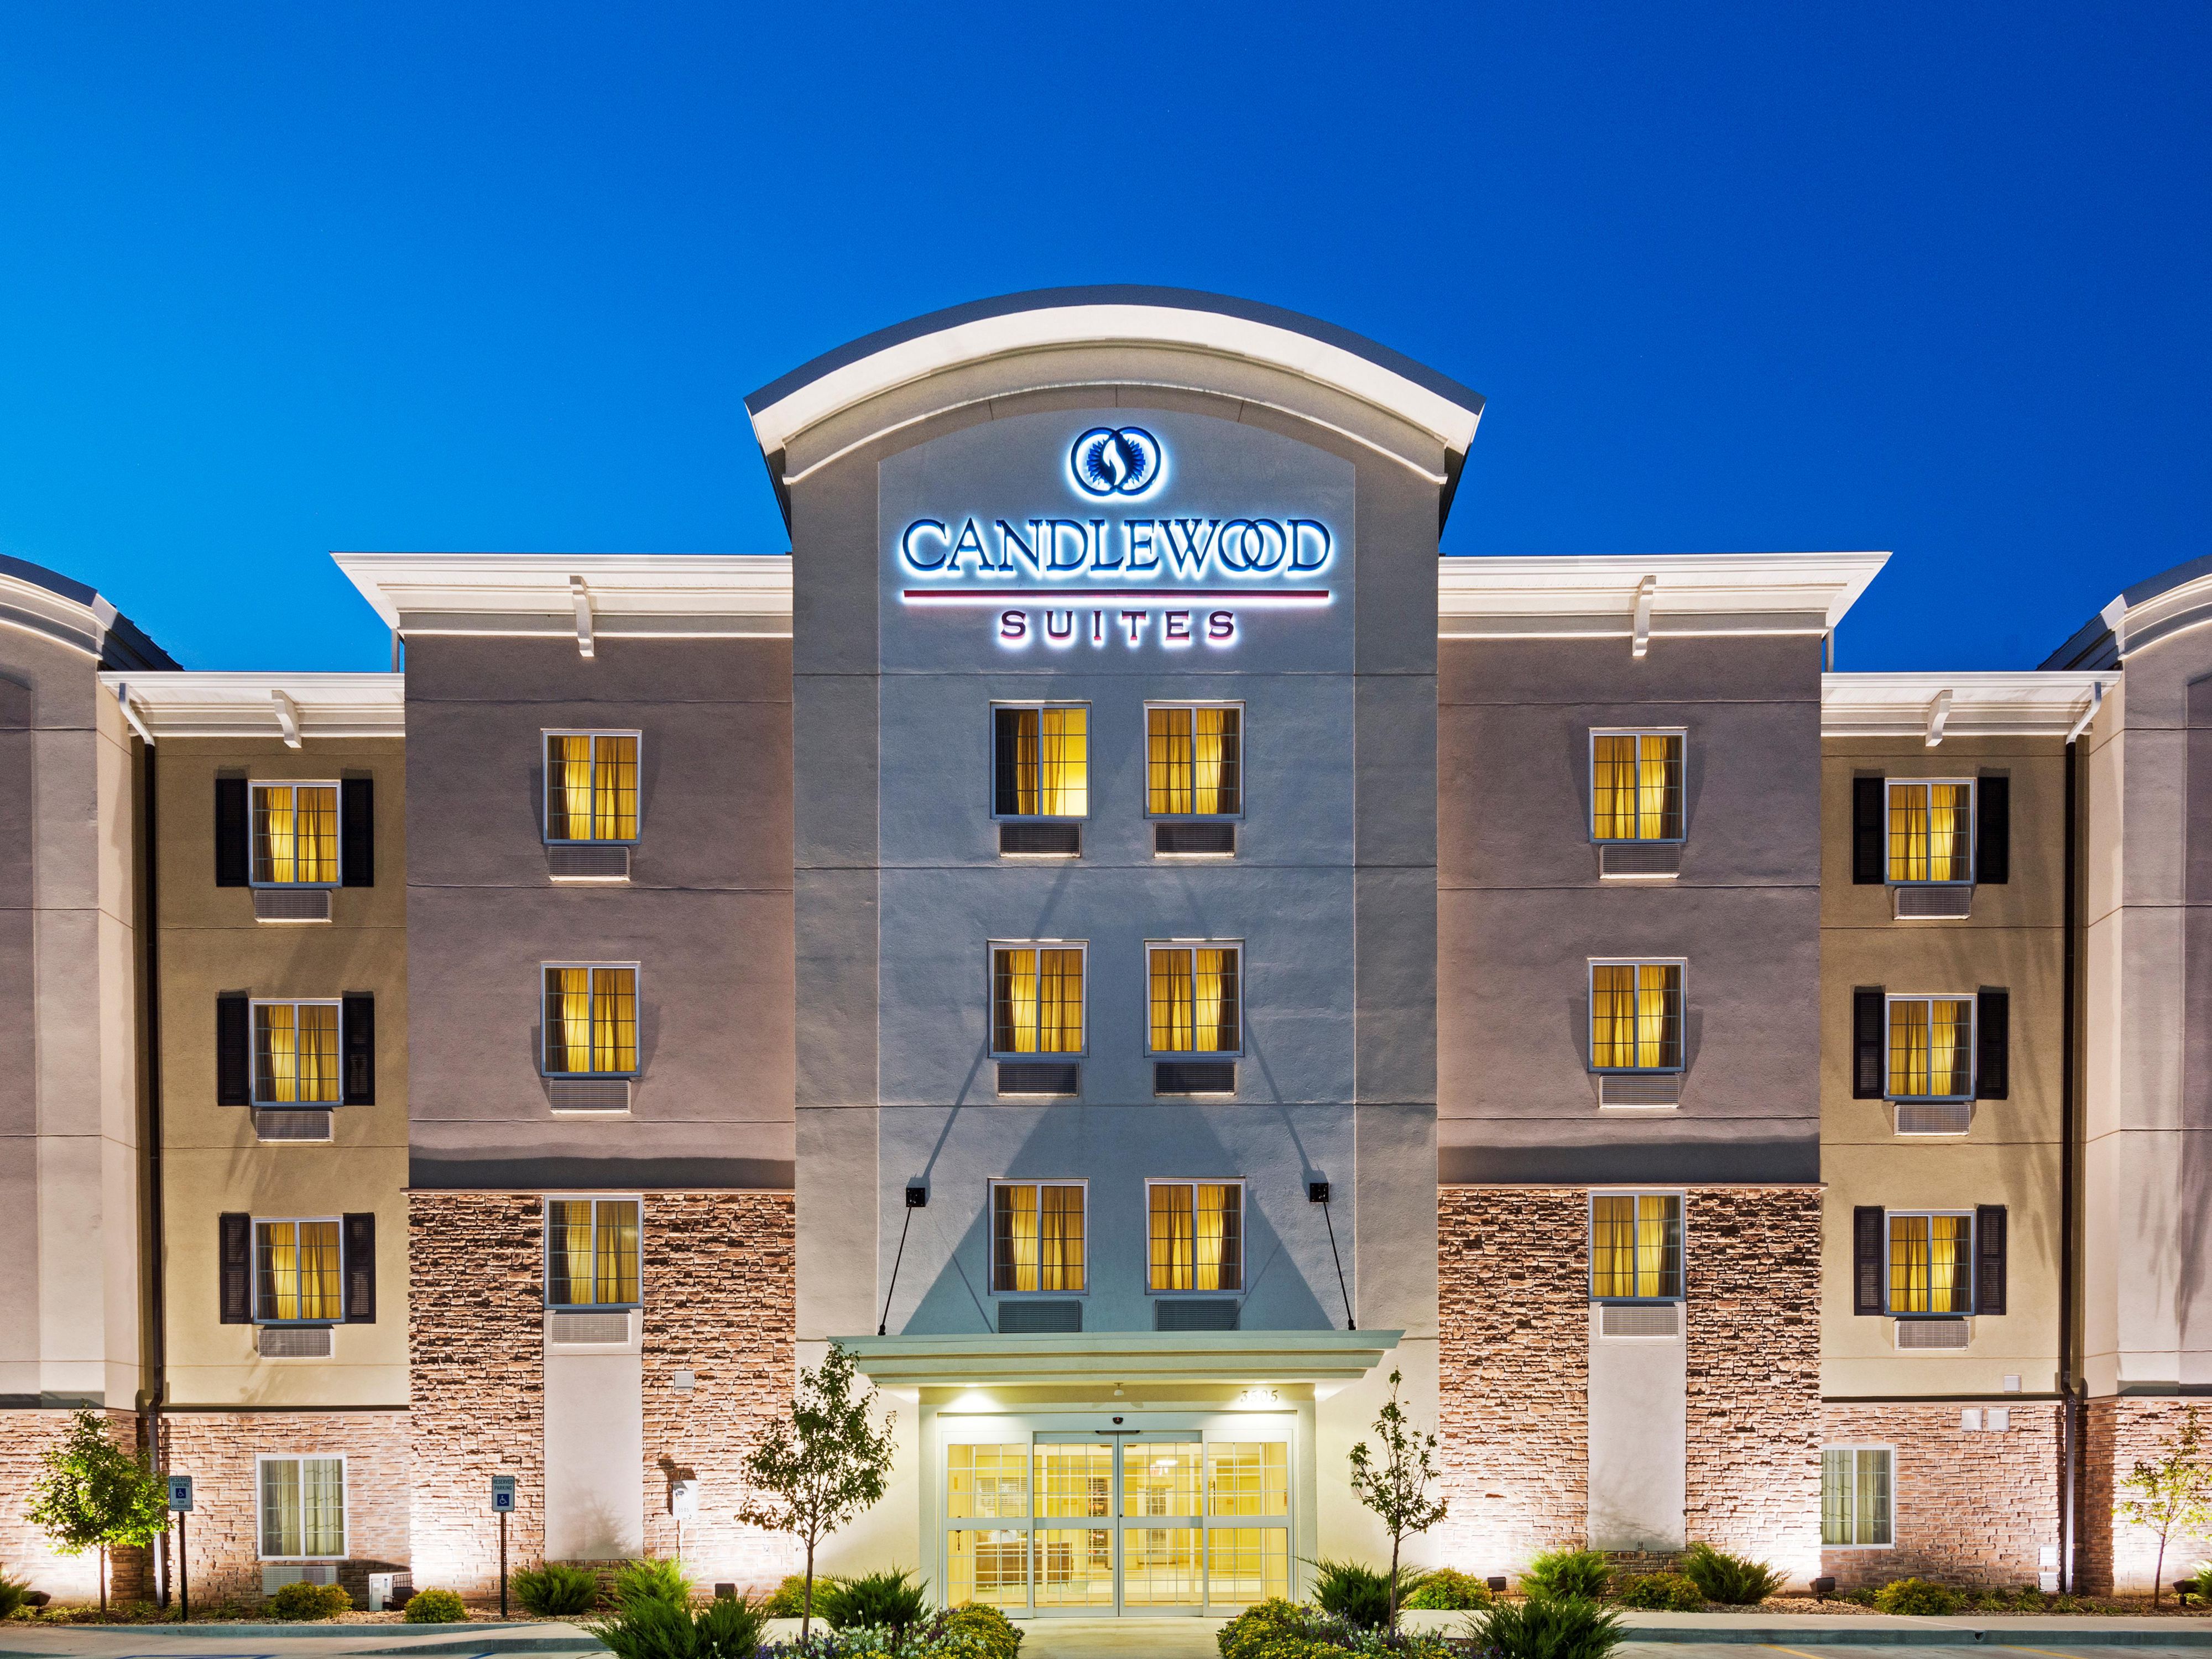 Candlewood Suites Austin Nw Lakeline Austin Hotel With Full